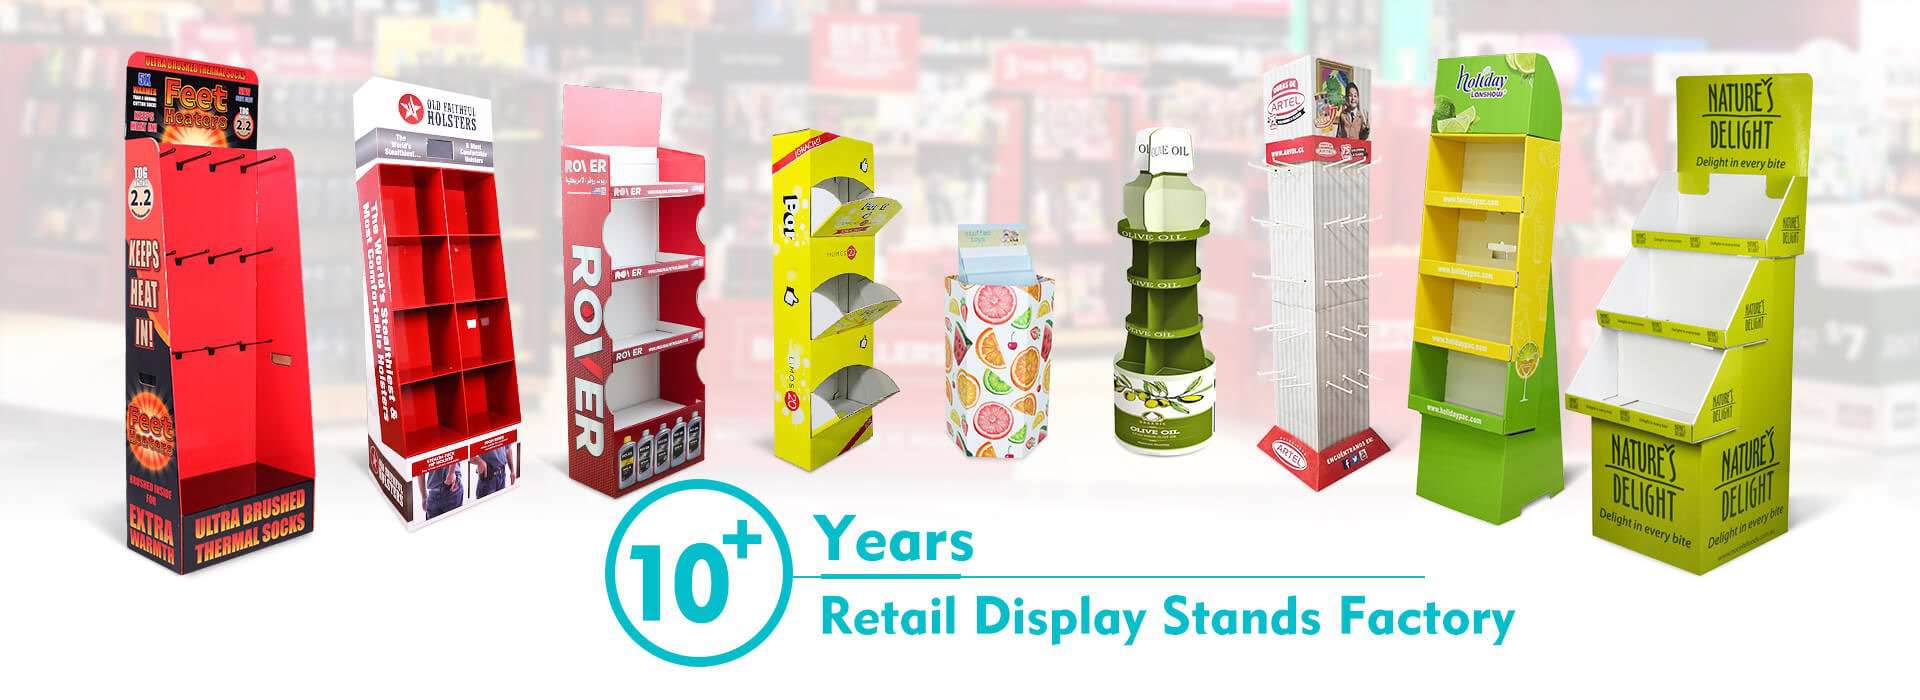 NOW!! Contact Us To Meet Your Display Stands Needs